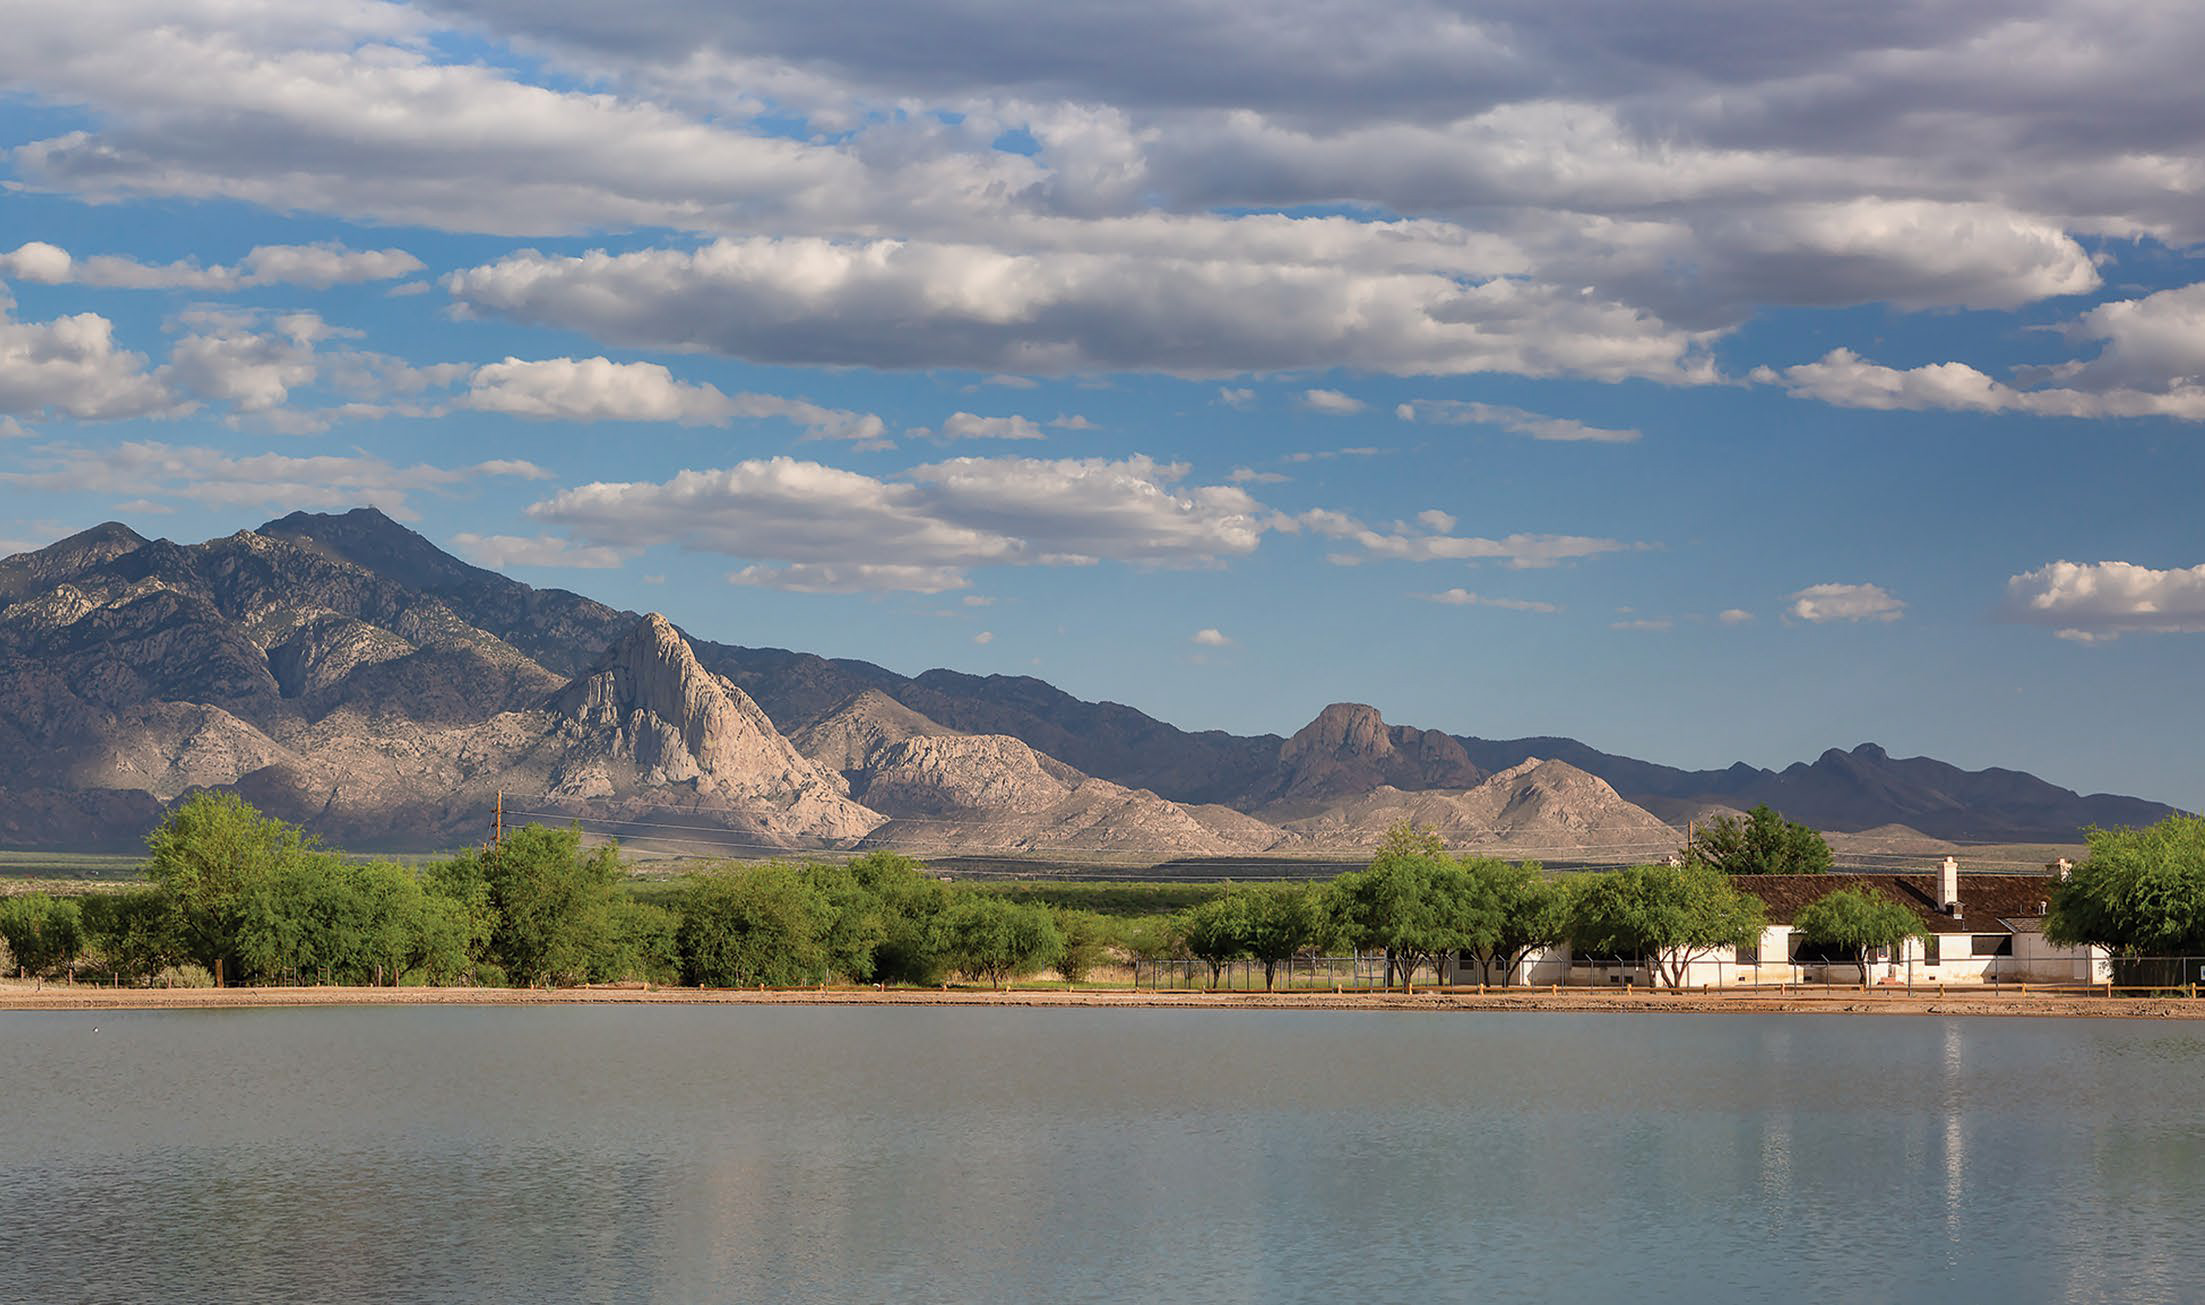 View of the Canoa Ranch and Lake.